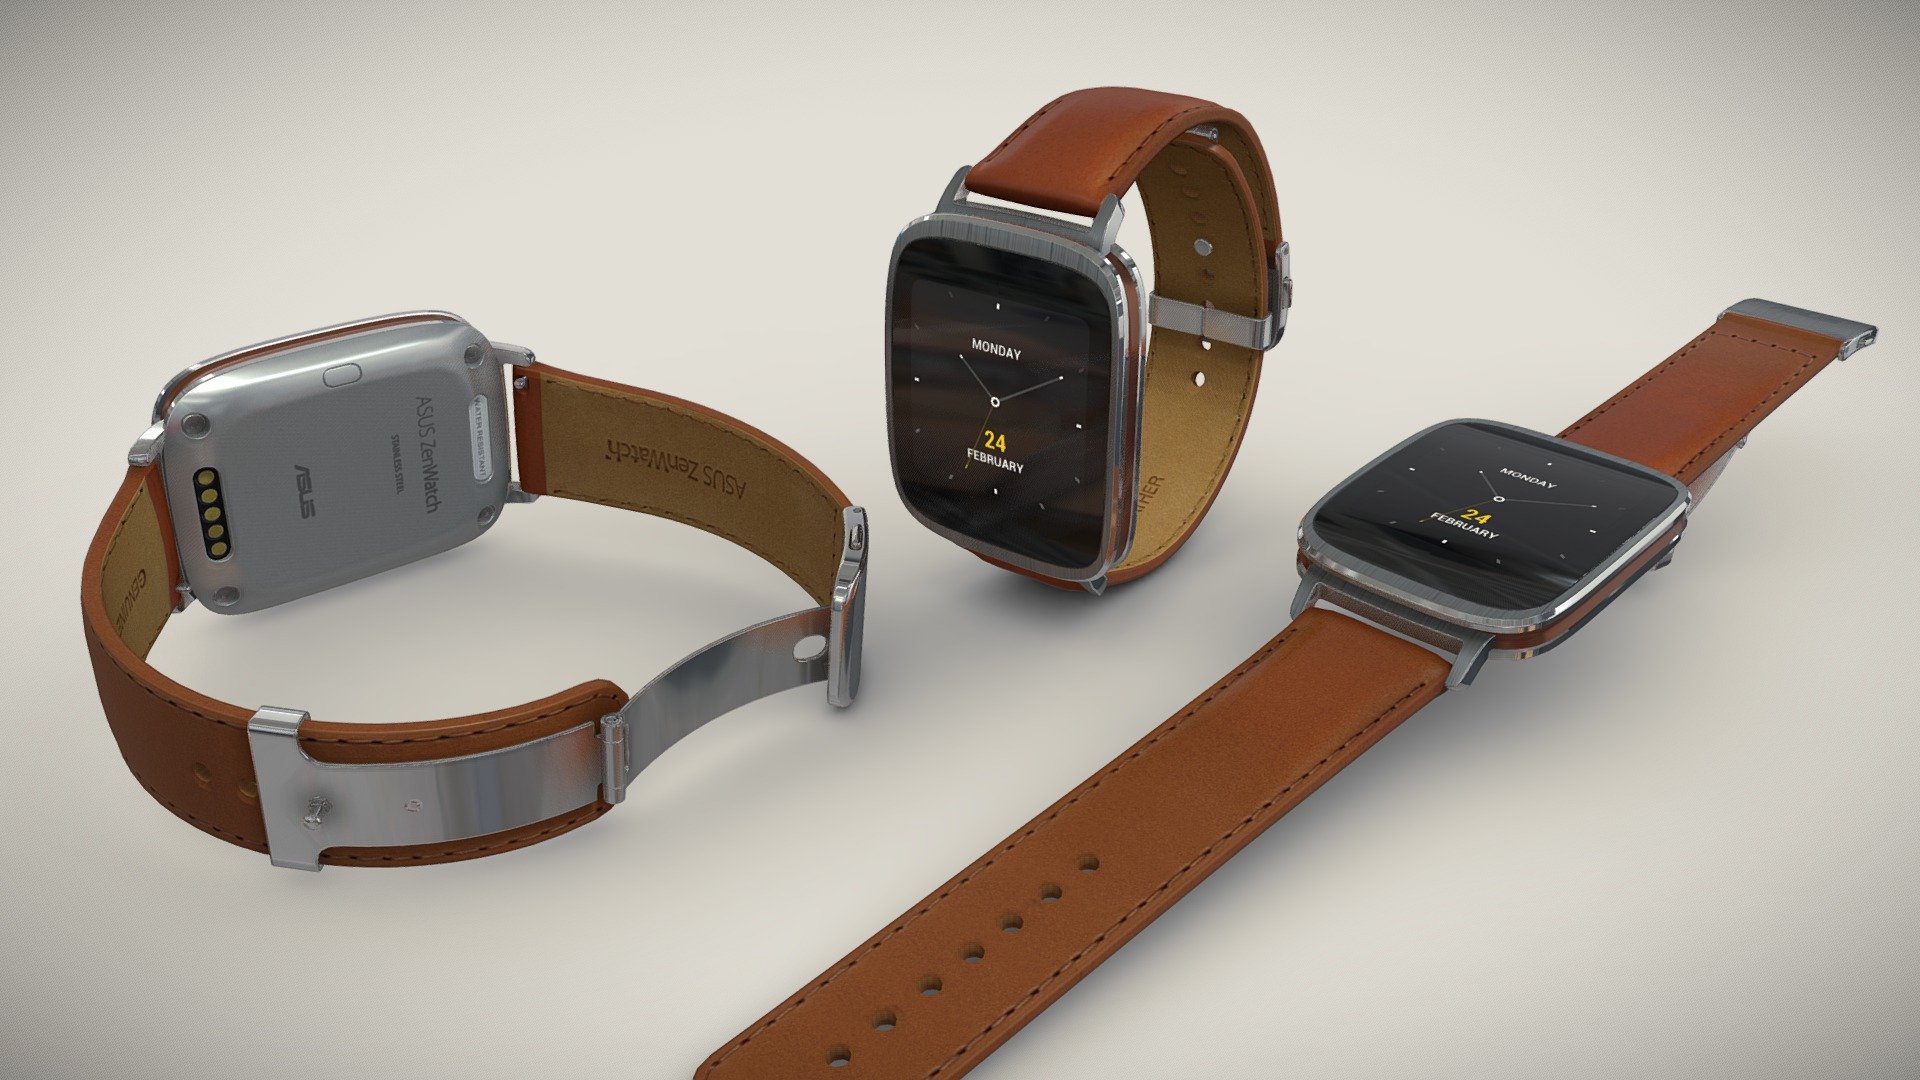 •   Let me present to you high-quality low-poly 3D model Asus ZenWatch WI500Q. Modeling was made with ortho-photos of real watch that is why all details of design are recreated most authentically.

•    This model consists of a few meshes, it is low-polygonal and it has only one material. 

•   The total of the main textures is 5. Resolution of all textures is 4096 pixels square aspect ratio in .png format. Also there is original texture file .PSD format in separate archive.

•   Polygon count of the model is – 6458.

•   The model has correct dimensions in real-world scale. All parts grouped and named correctly.

•   To use the model in other 3D programs there are scenes saved in formats .fbx, .obj, .DAE, .max (2010 version).

Note: If you see some artifacts on the textures, it means compression works in the Viewer. We recommend setting HD quality for textures. But anyway, original textures have no artifacts 3d model